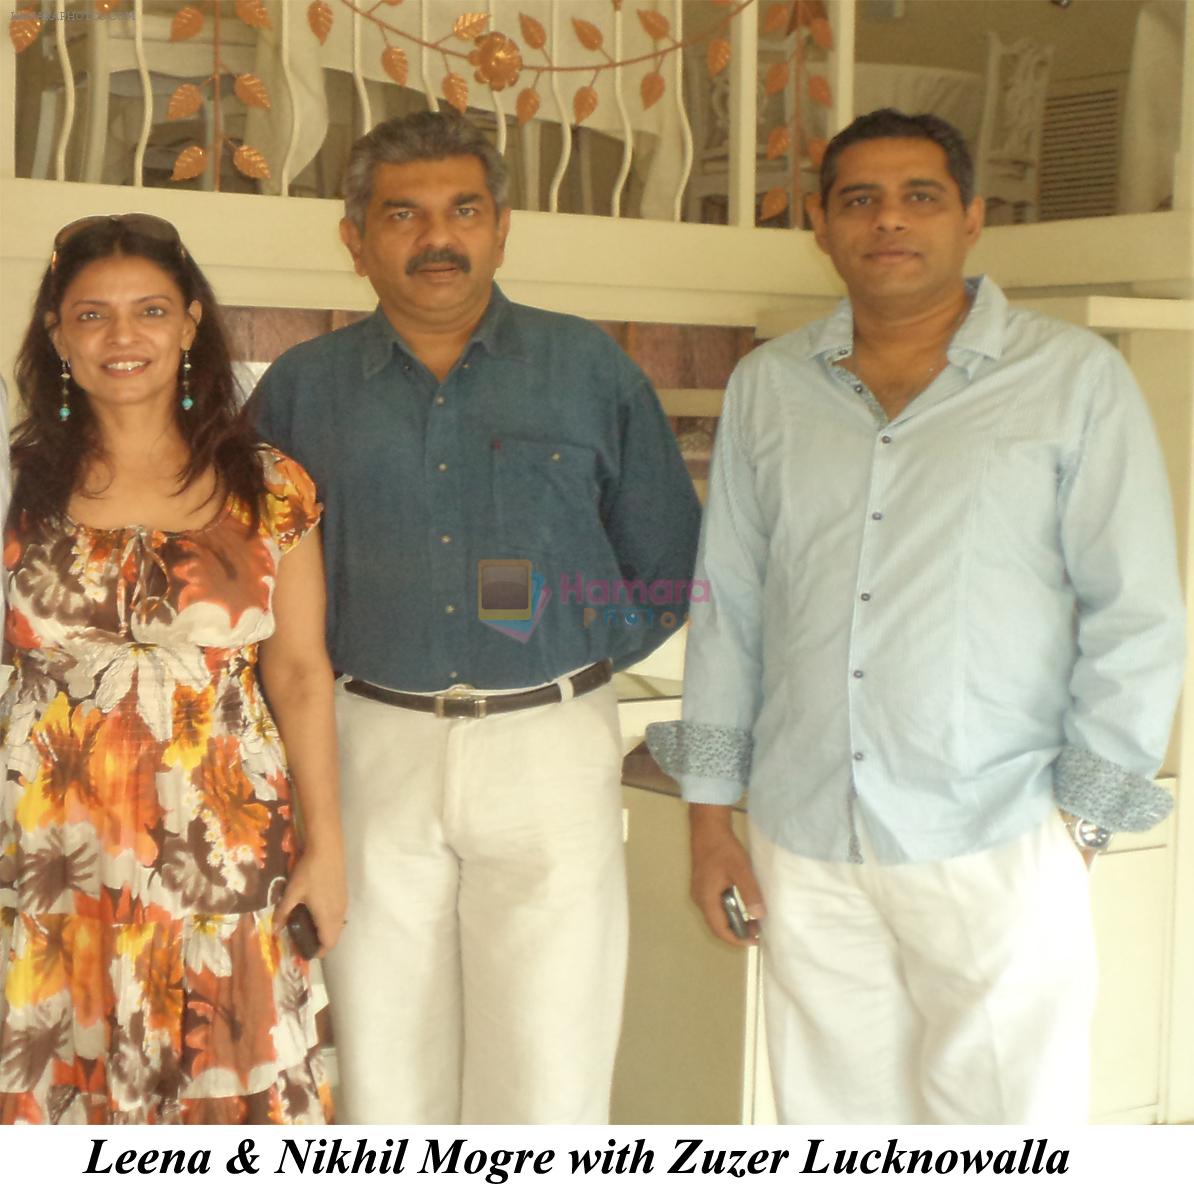 Leena & Nikhil Mogre with Zuzer Lucknowalla at the Art and Fashion Brunch in The Wedding Cafe n Lounge on 22nd Jan 2012